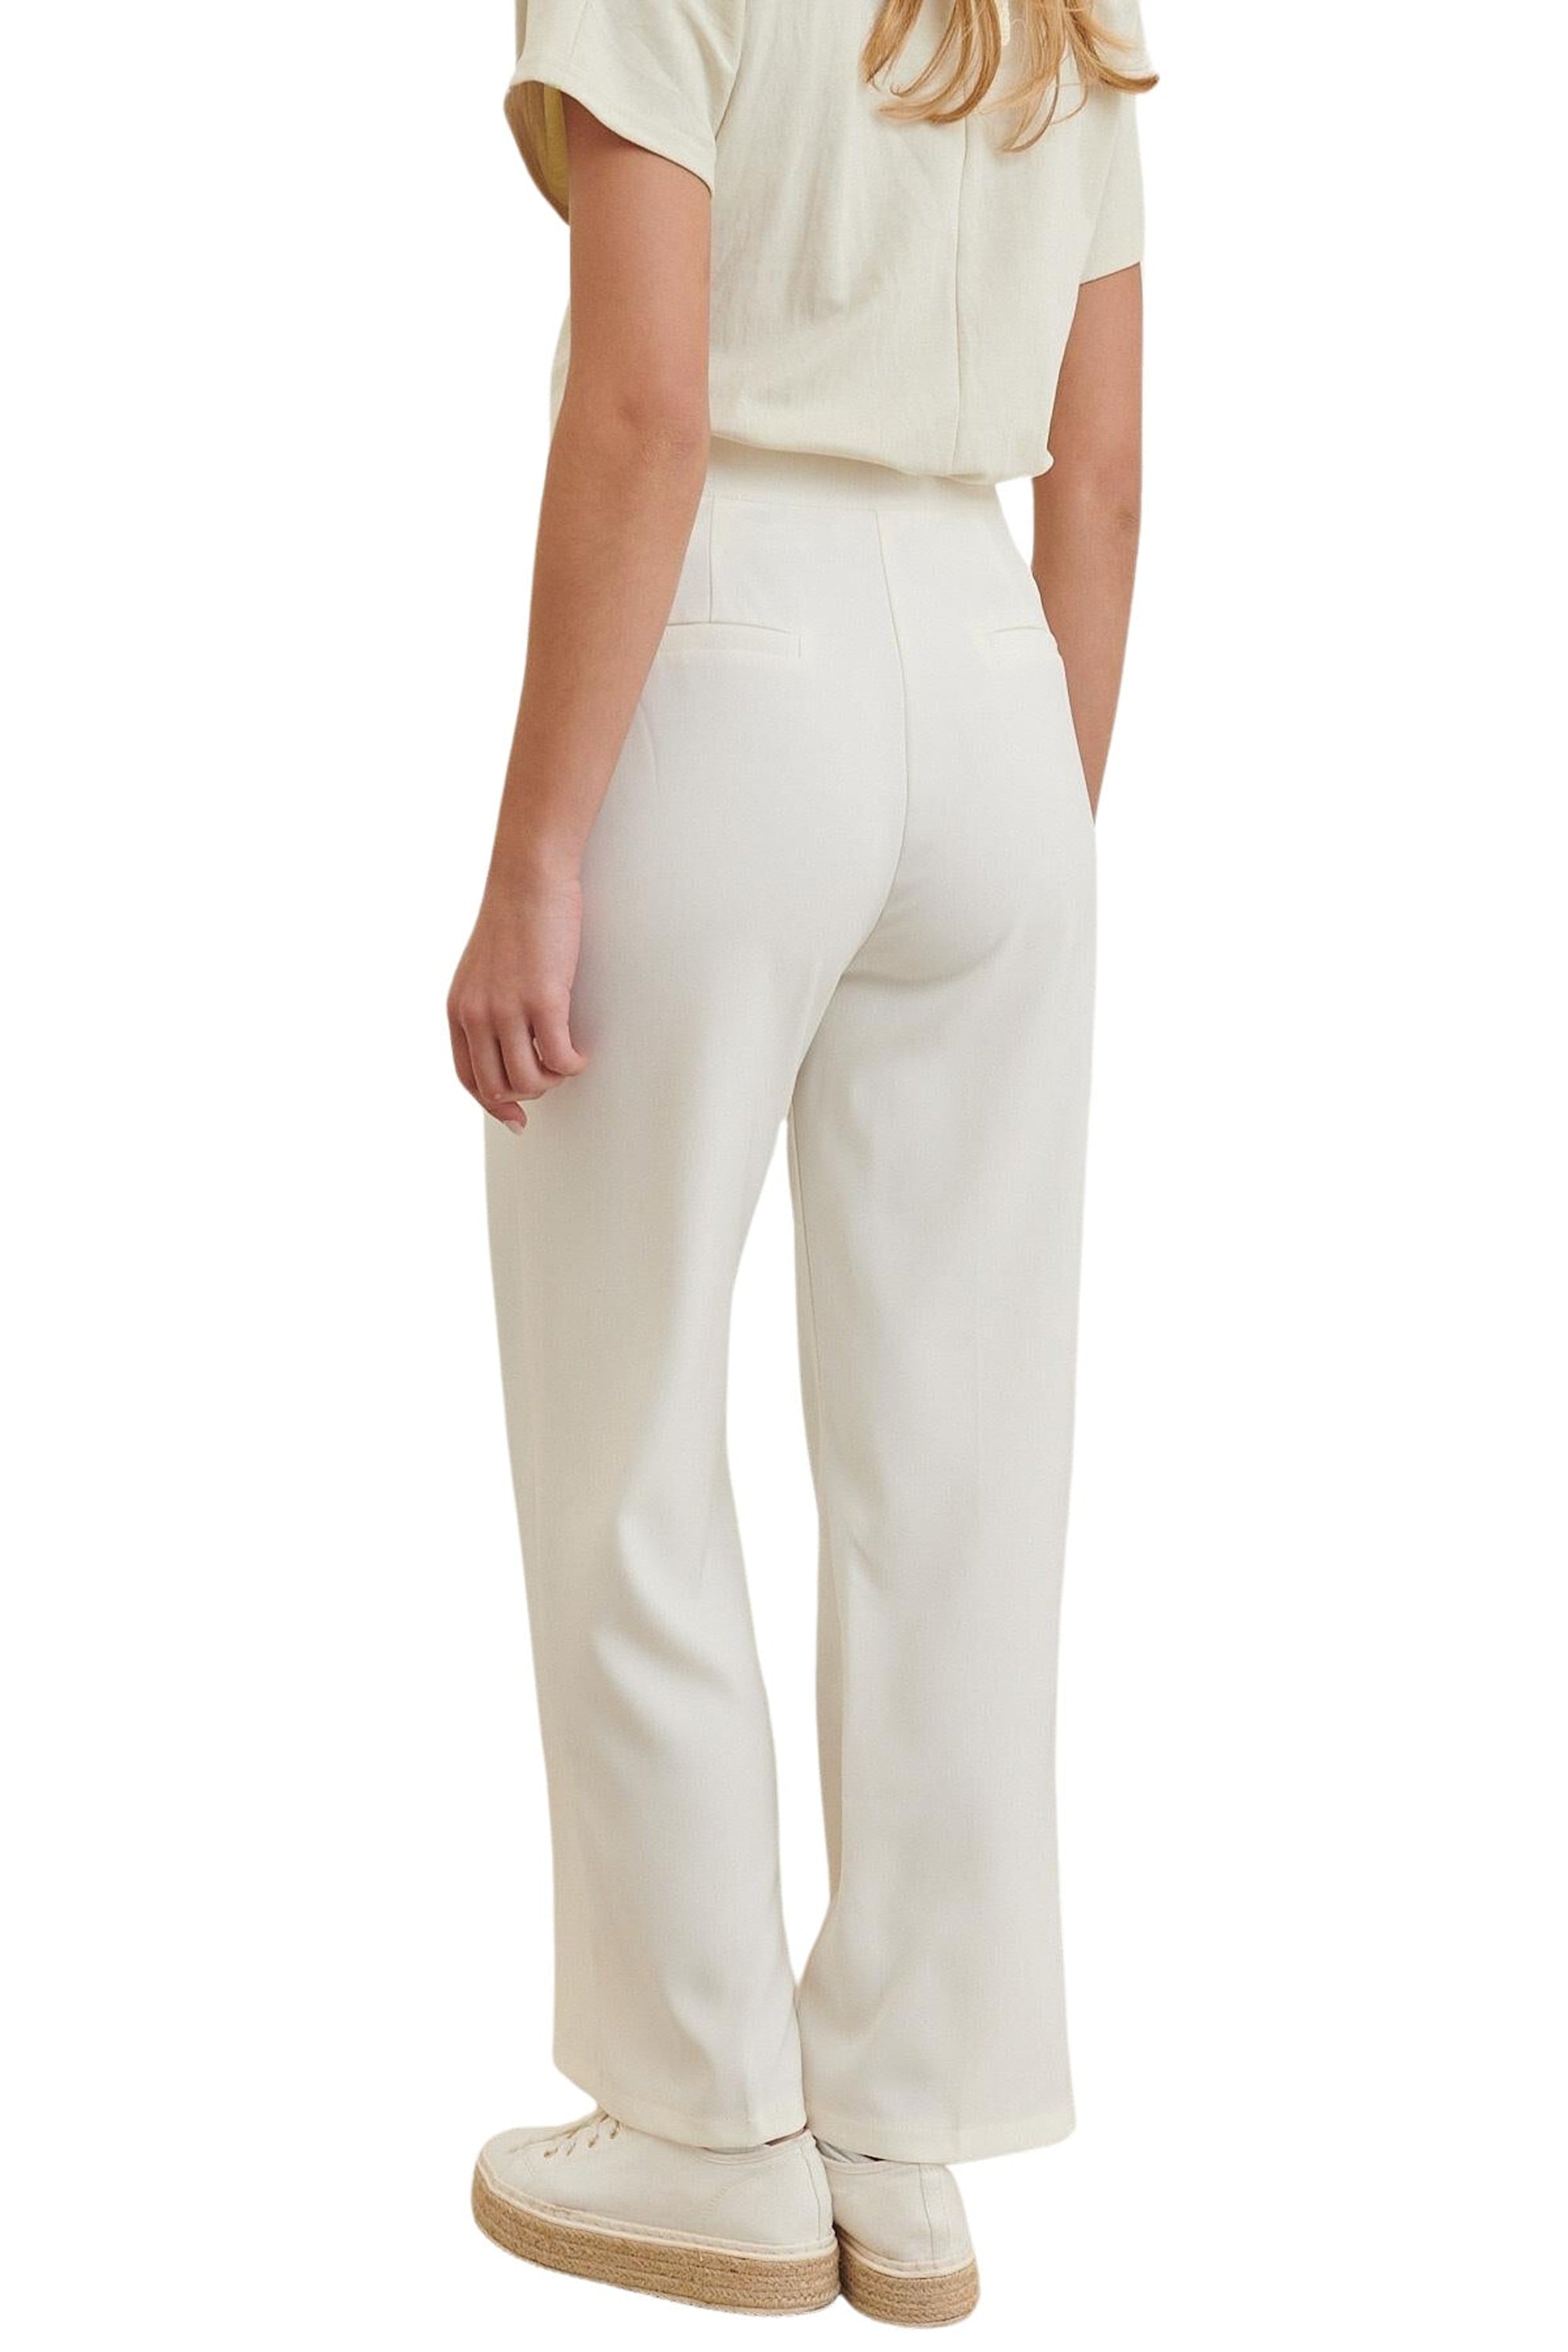 Clever Alice French Trousers - clever alice